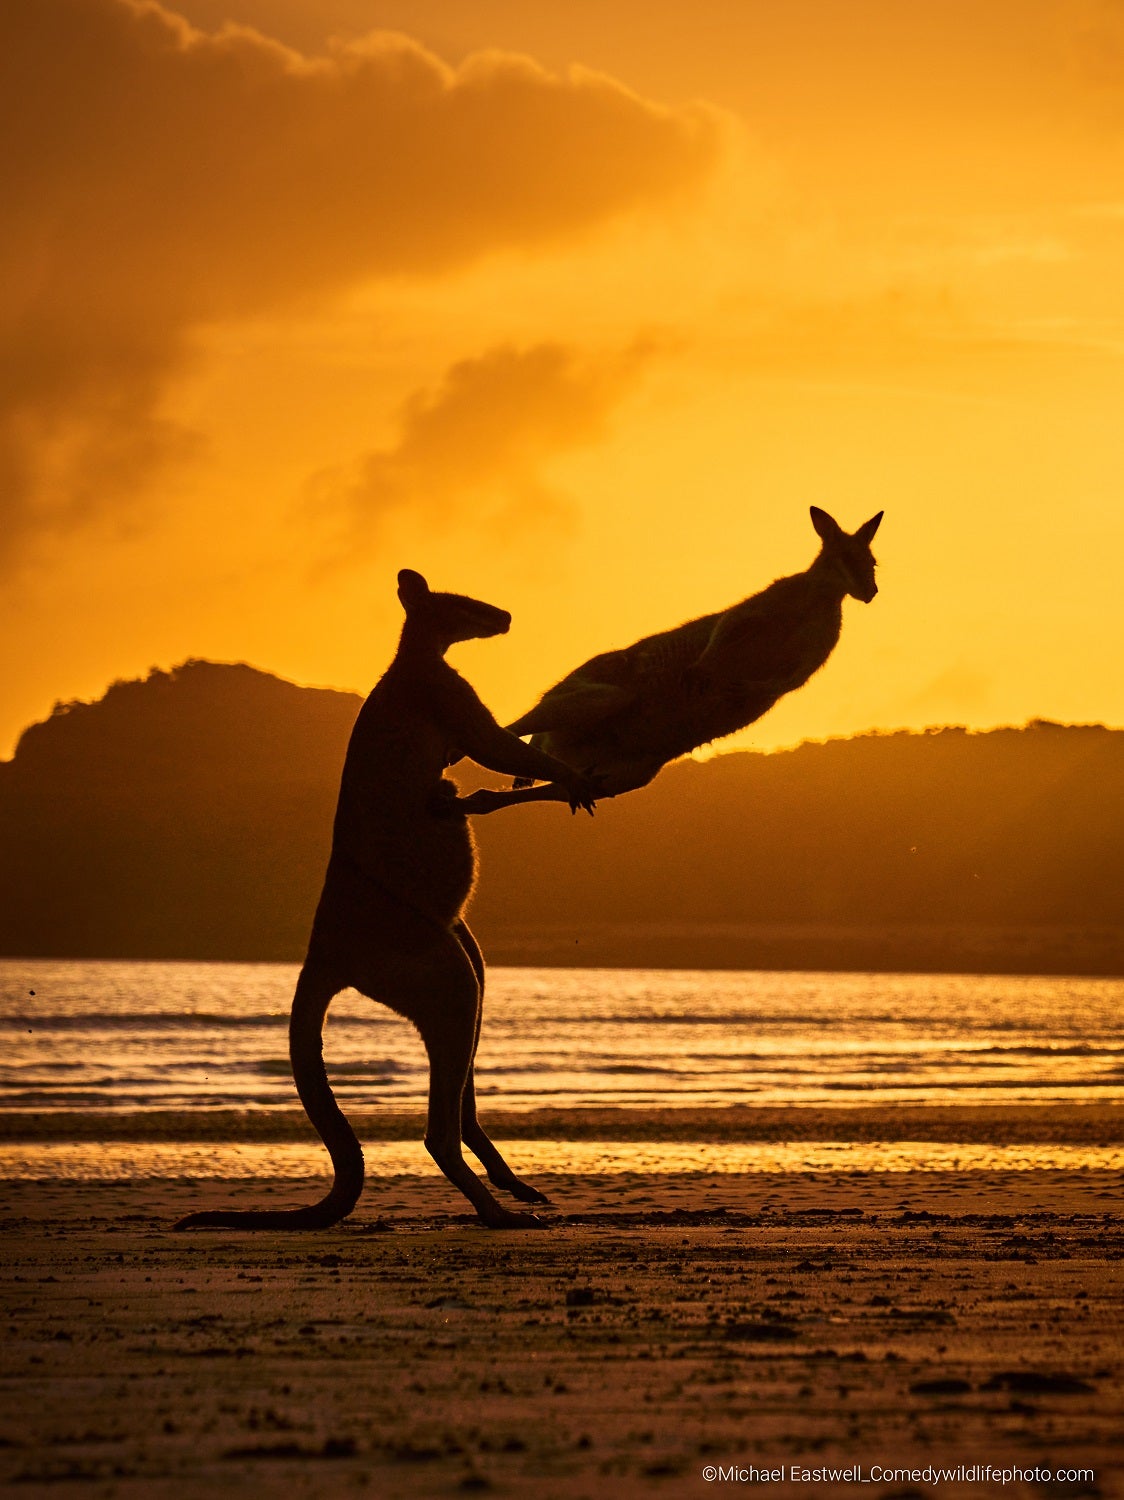 Two wallabies kicking each other on the beach against the sunrise